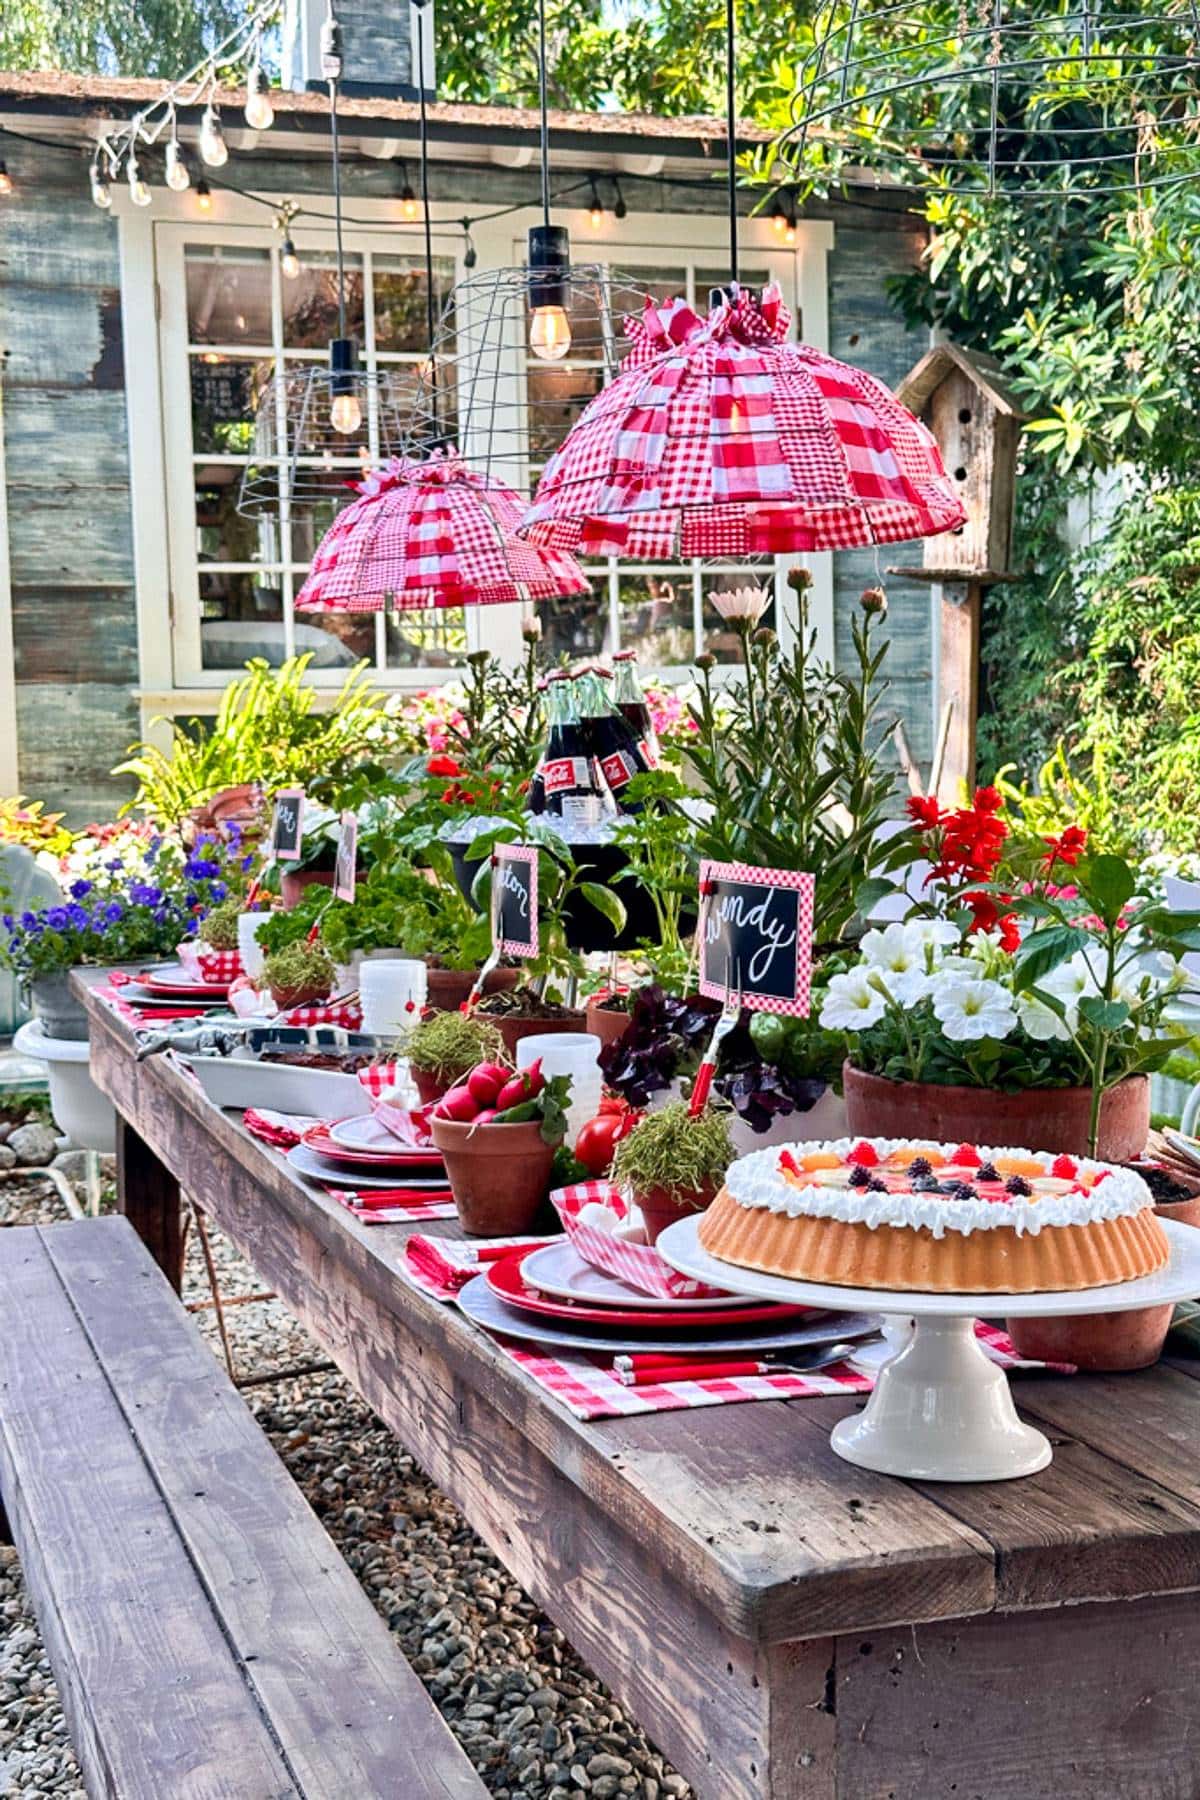 Summer tablescape in red and white colors. Two lampshades adorn the table with red and white check, and fruits and vegetables with fresh herb plants decorate the table. 